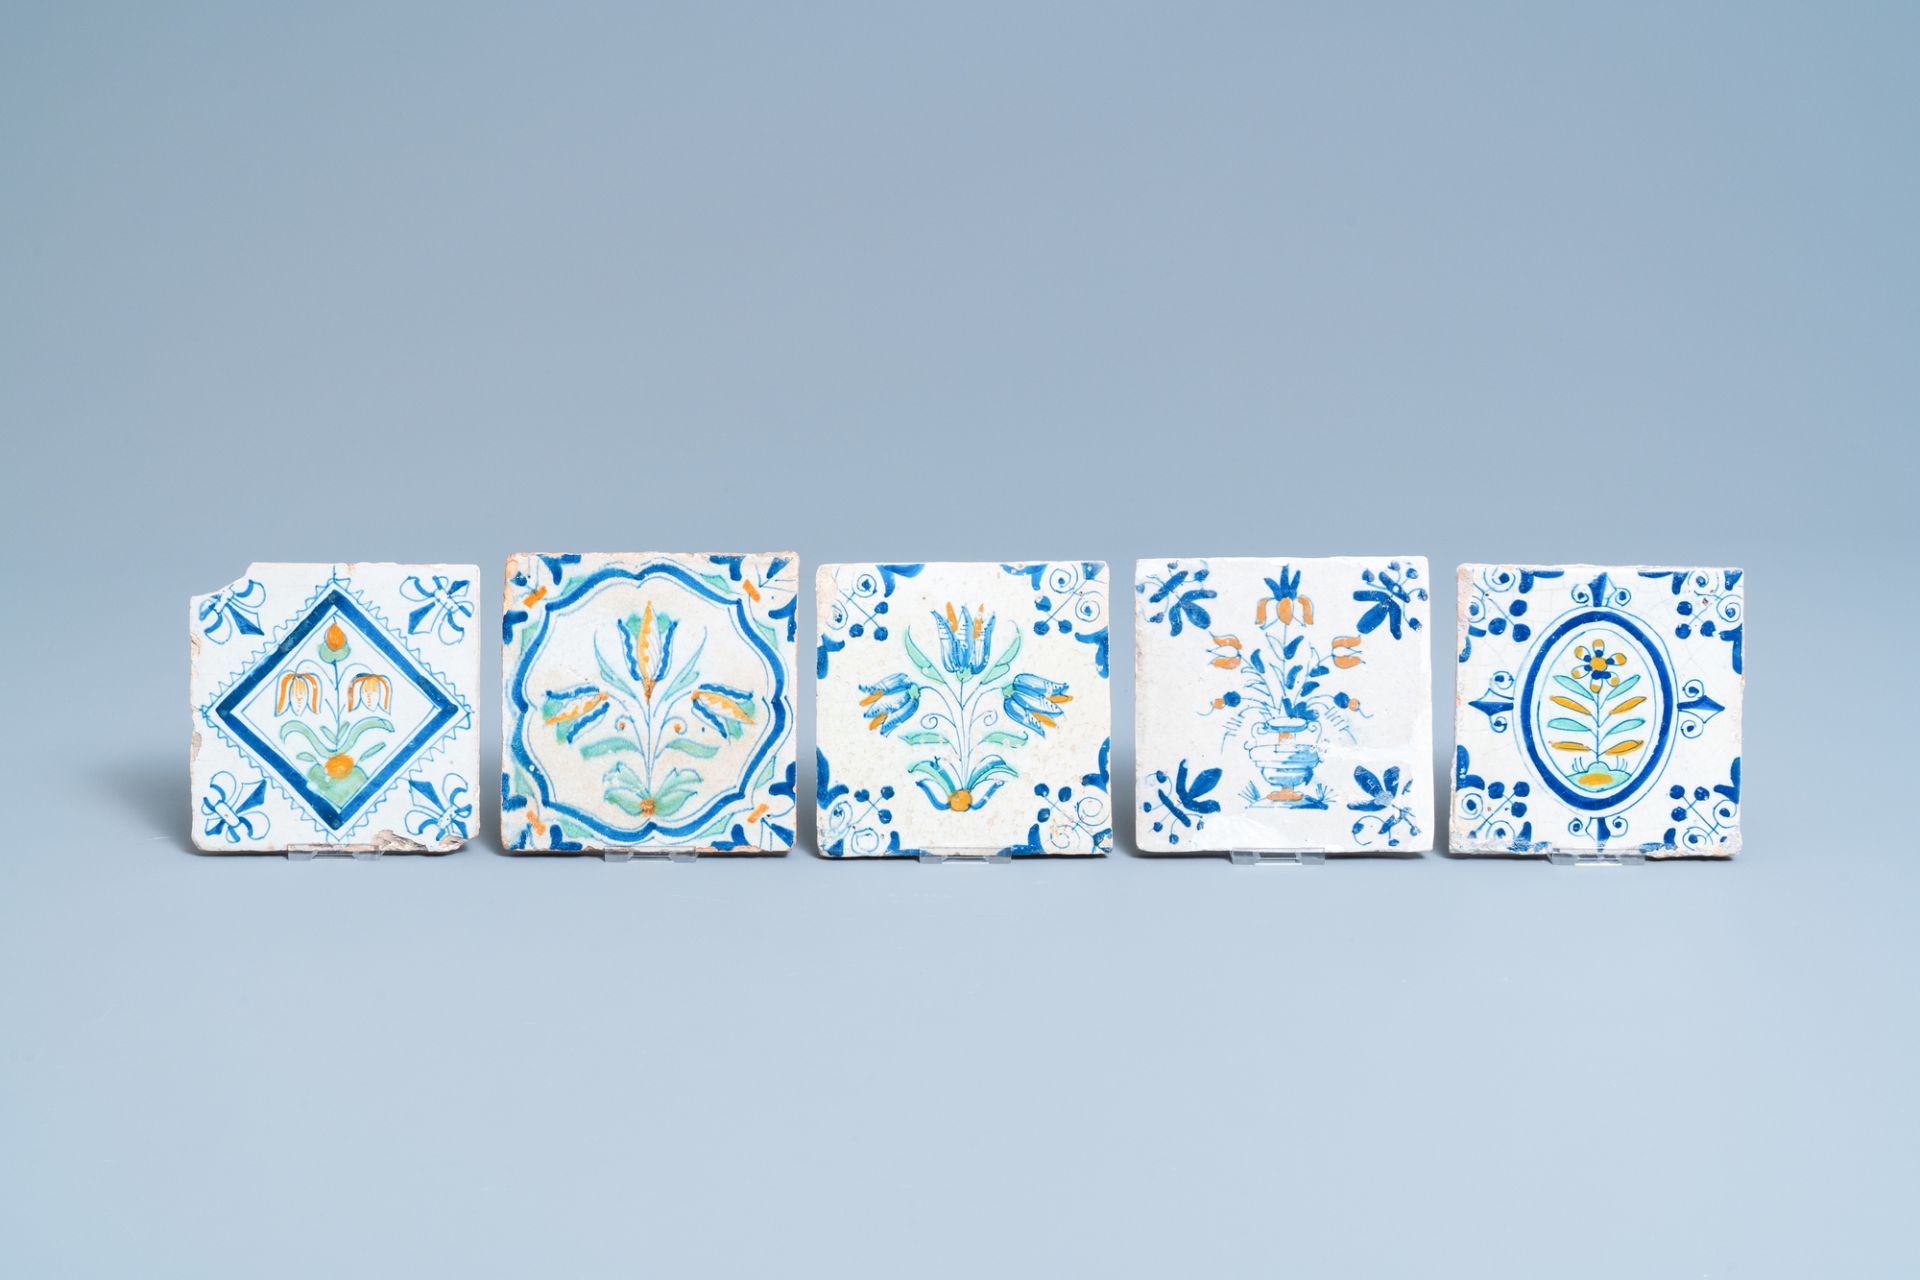 Ten polychrome Dutch Delft tiles with flowers and ornaments, 17th C. - Image 2 of 3